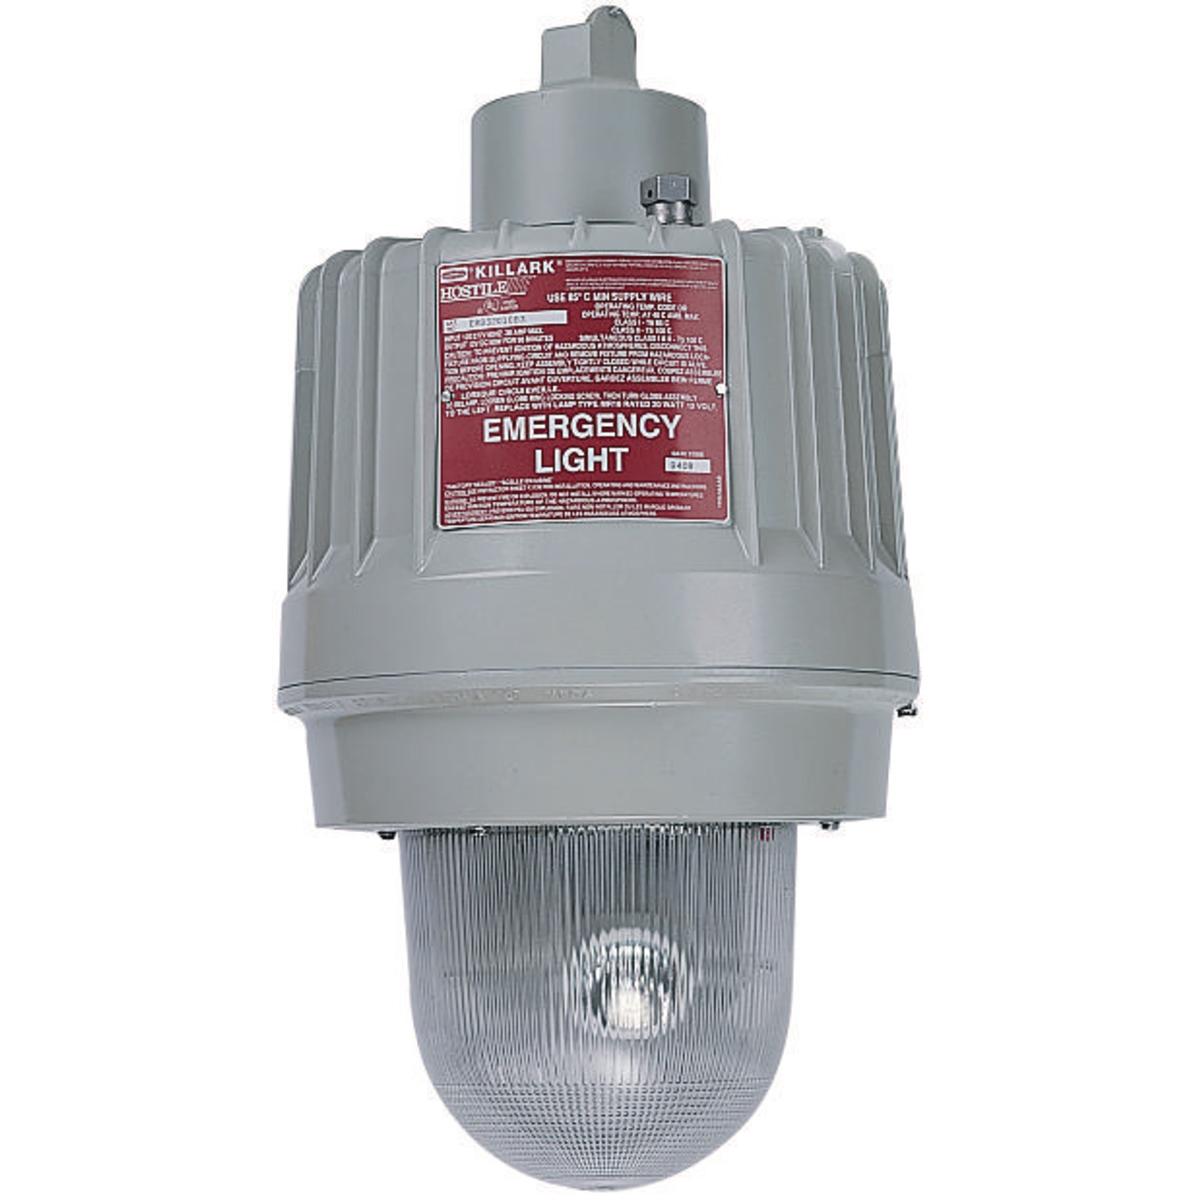 Hubbell EBB32010A3-TDR Emergency Hazardous Location Three Lamp 1" Pendant with 15 min Time Delay  ; Patented design three high intensity lamps can be independently adjusted to provide custom emergency lighting to a specific area ; Three 20 watt MR16 lamps included ; Pendant, br